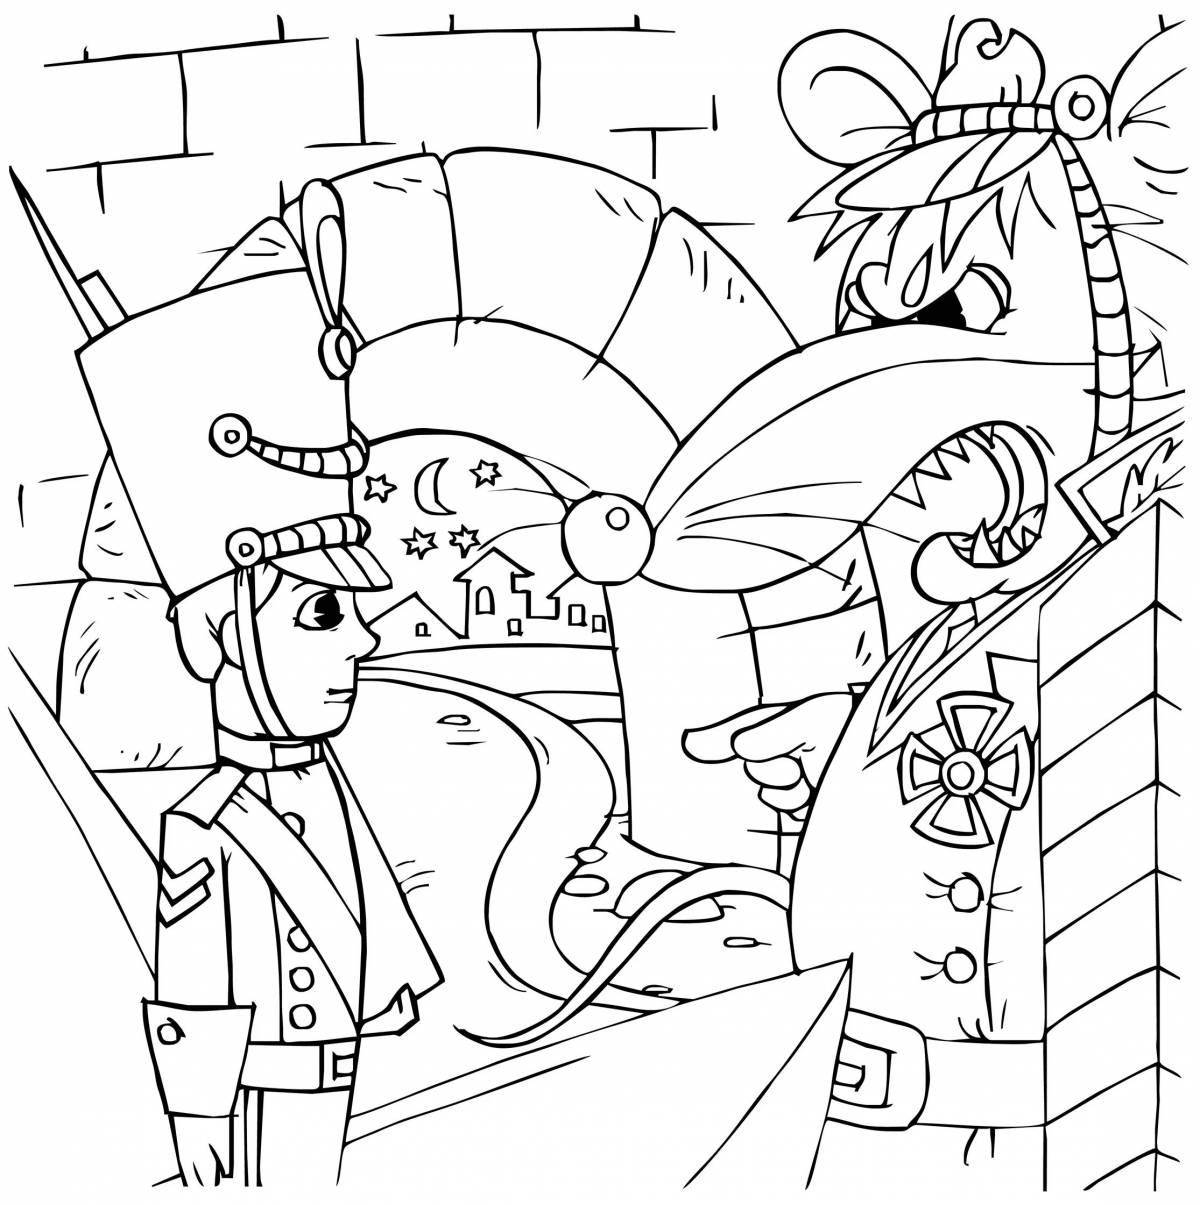 Adorable tin soldier coloring pages